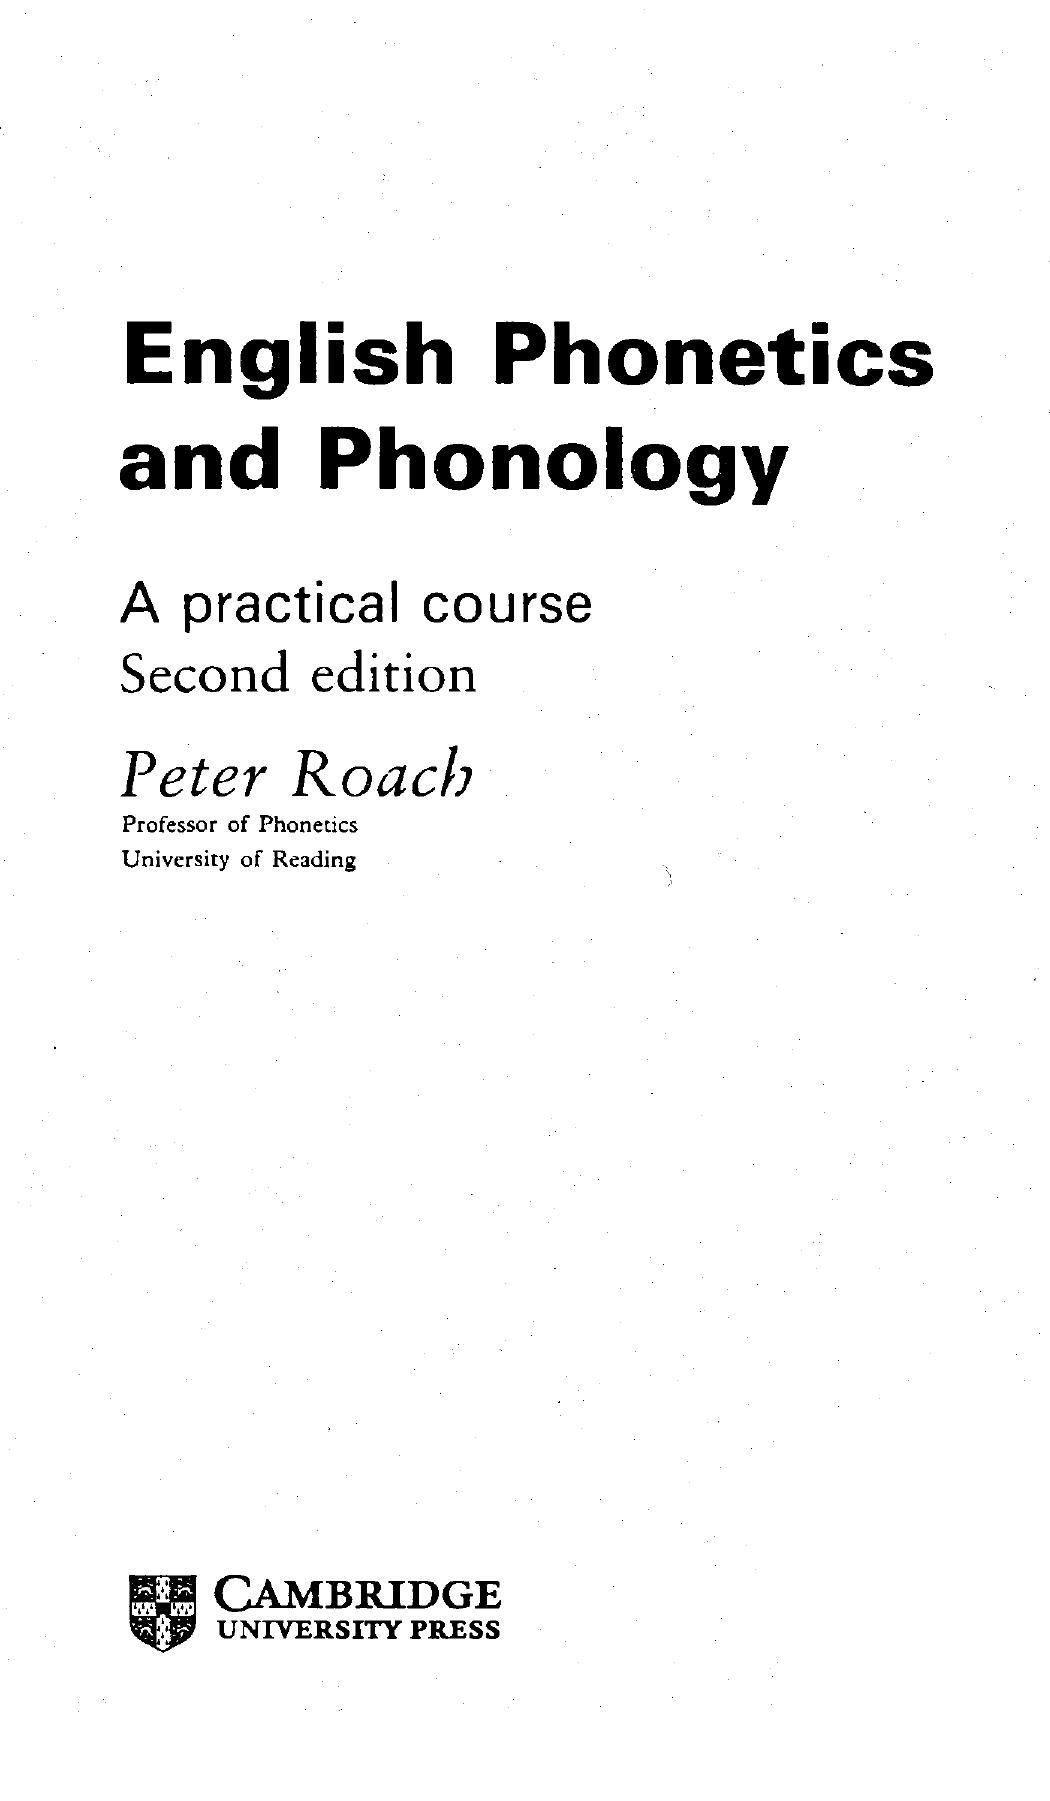 Peter Roach — English Phonetics and Phonology 1998